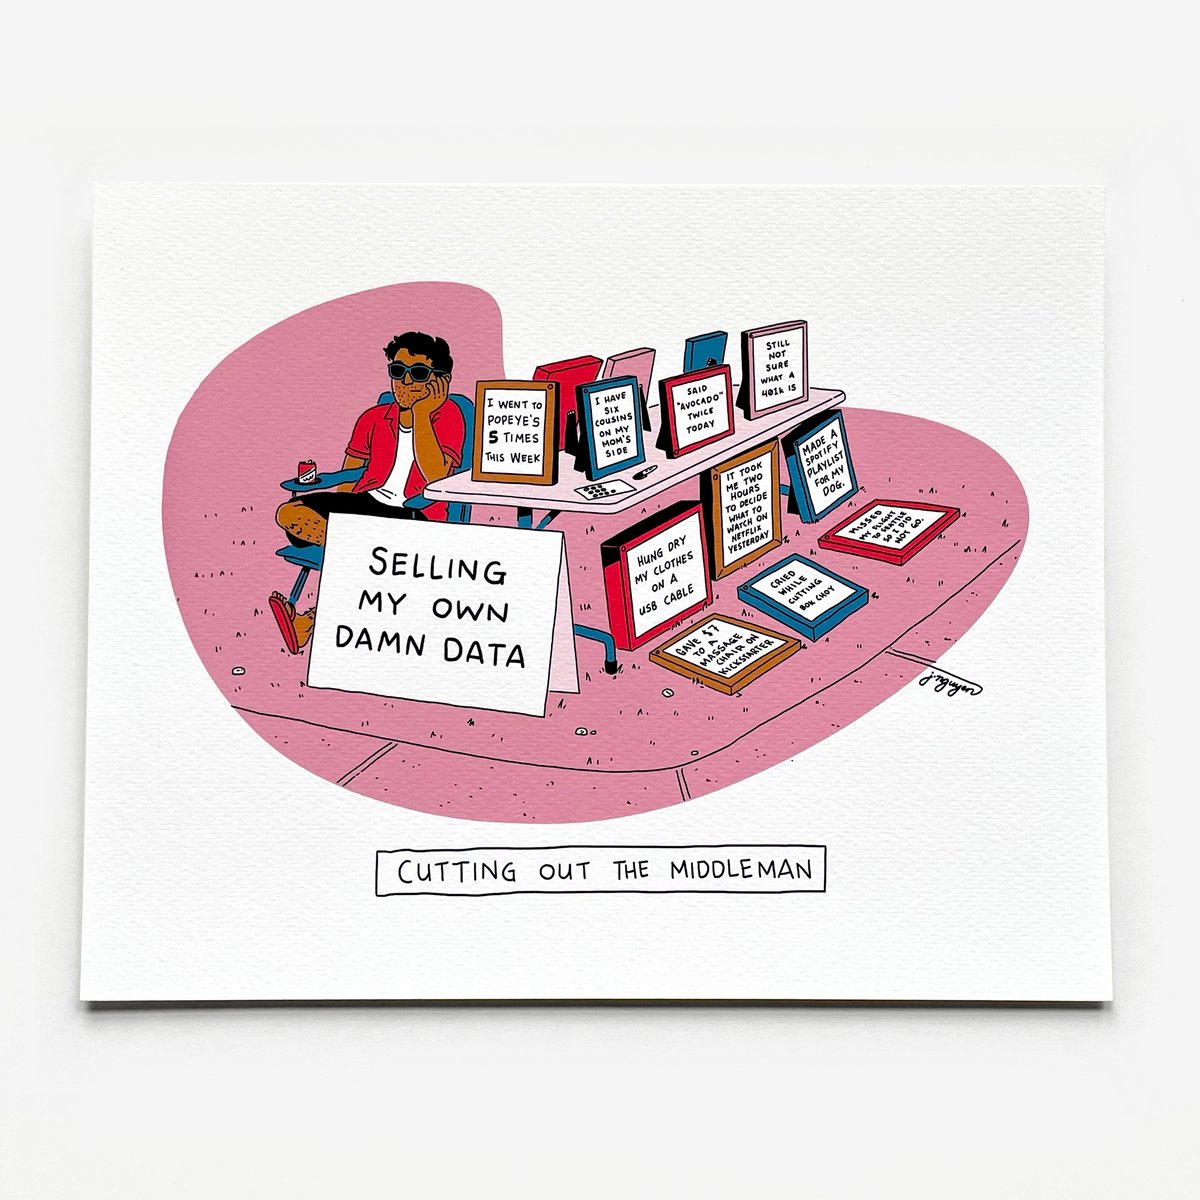 Image of "Selling My Own Damn Data" Print